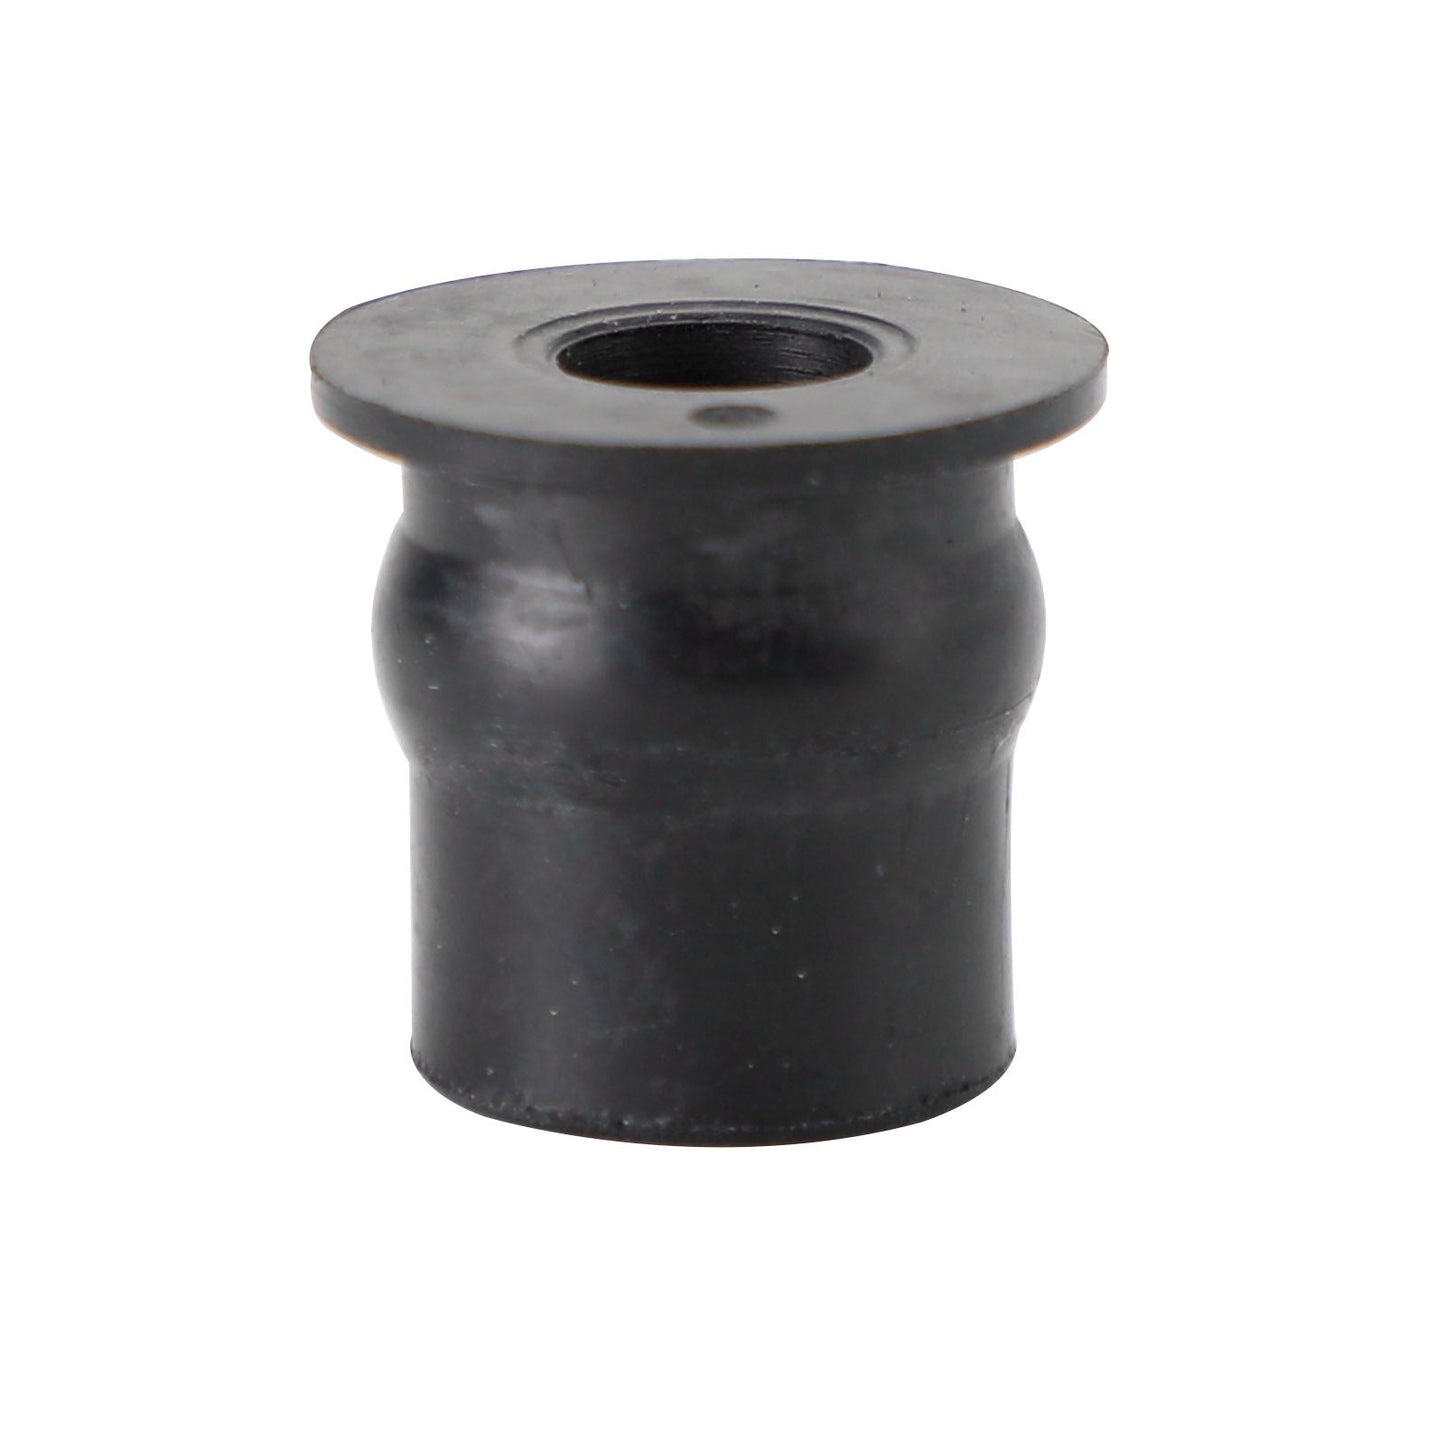 M6 Rubber Well Nuts Wellnuts for Fairing & Screen Fixing Pack of 10 - 13mm Hole